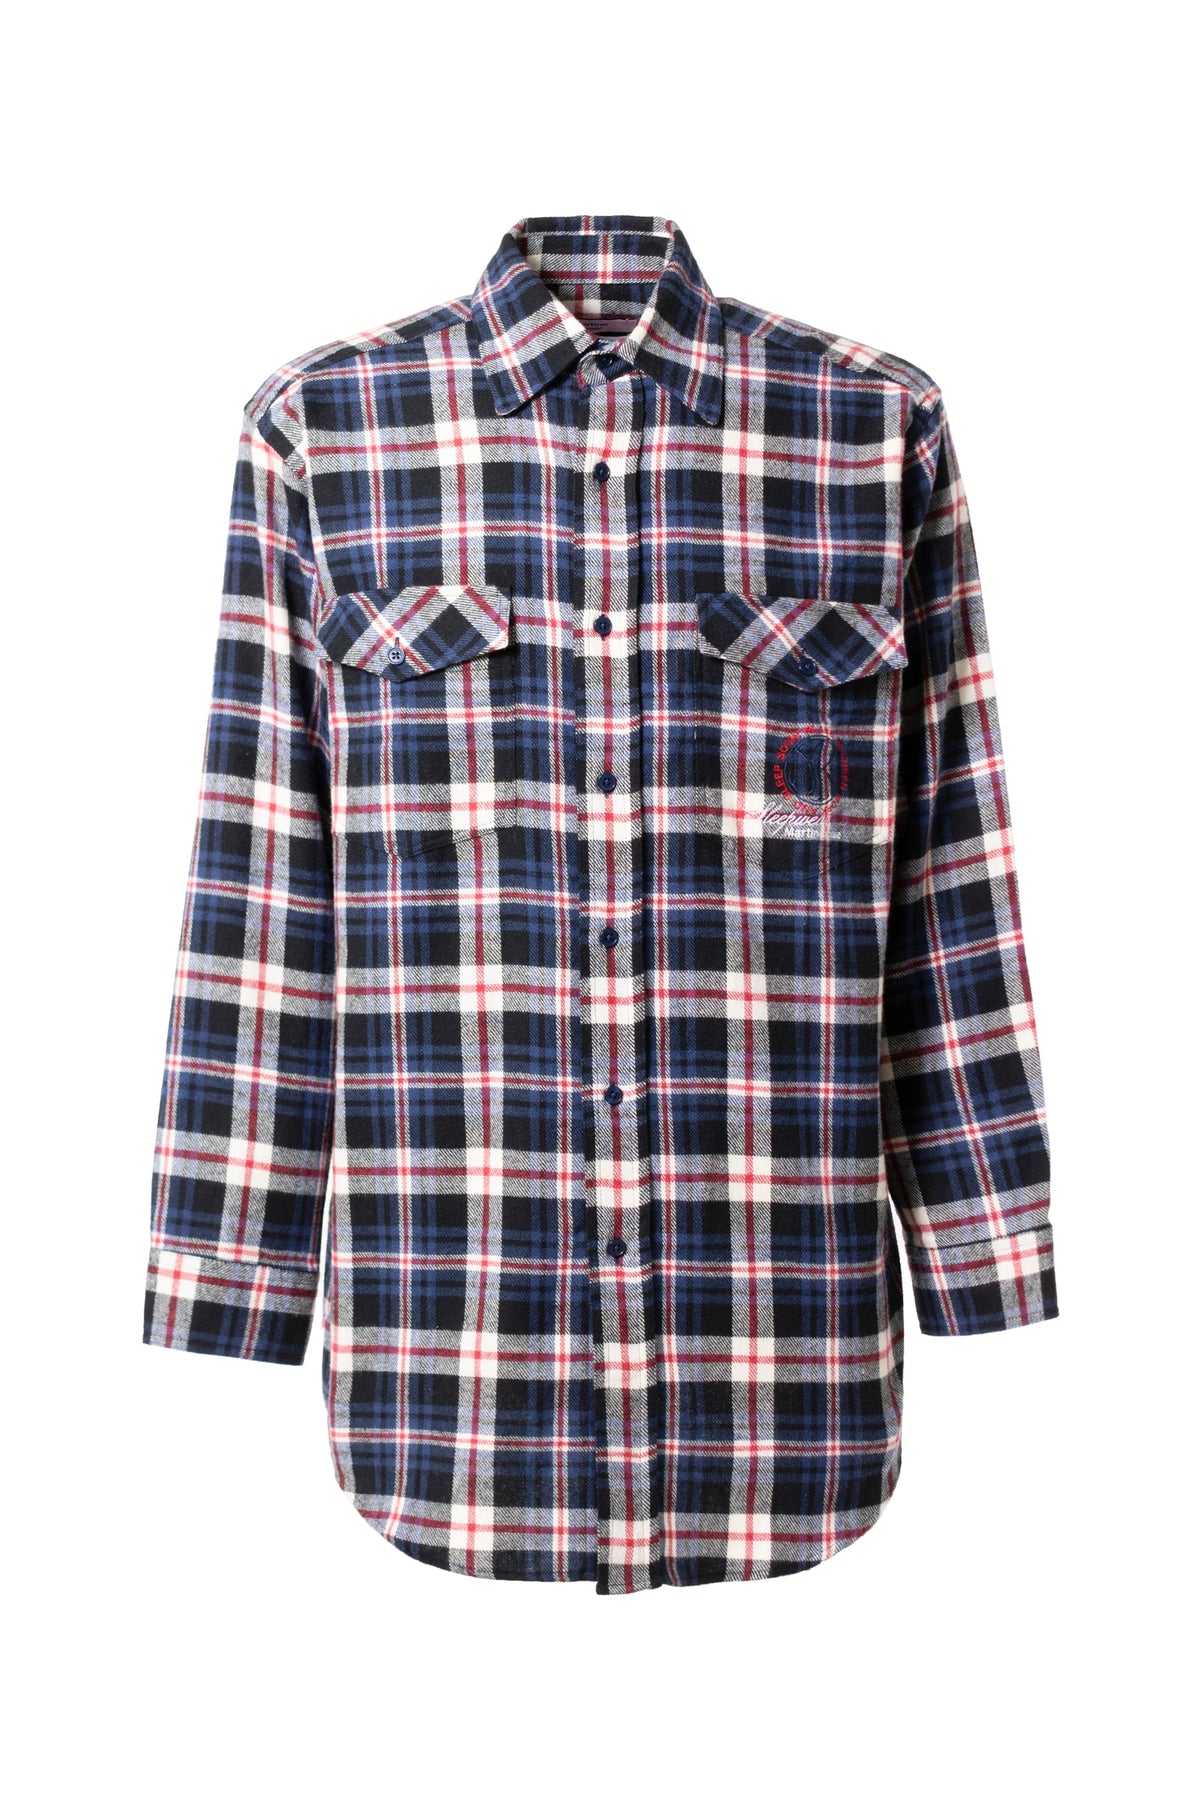 Martine Rose FLANNEL OVERSHIRT / RED NVY